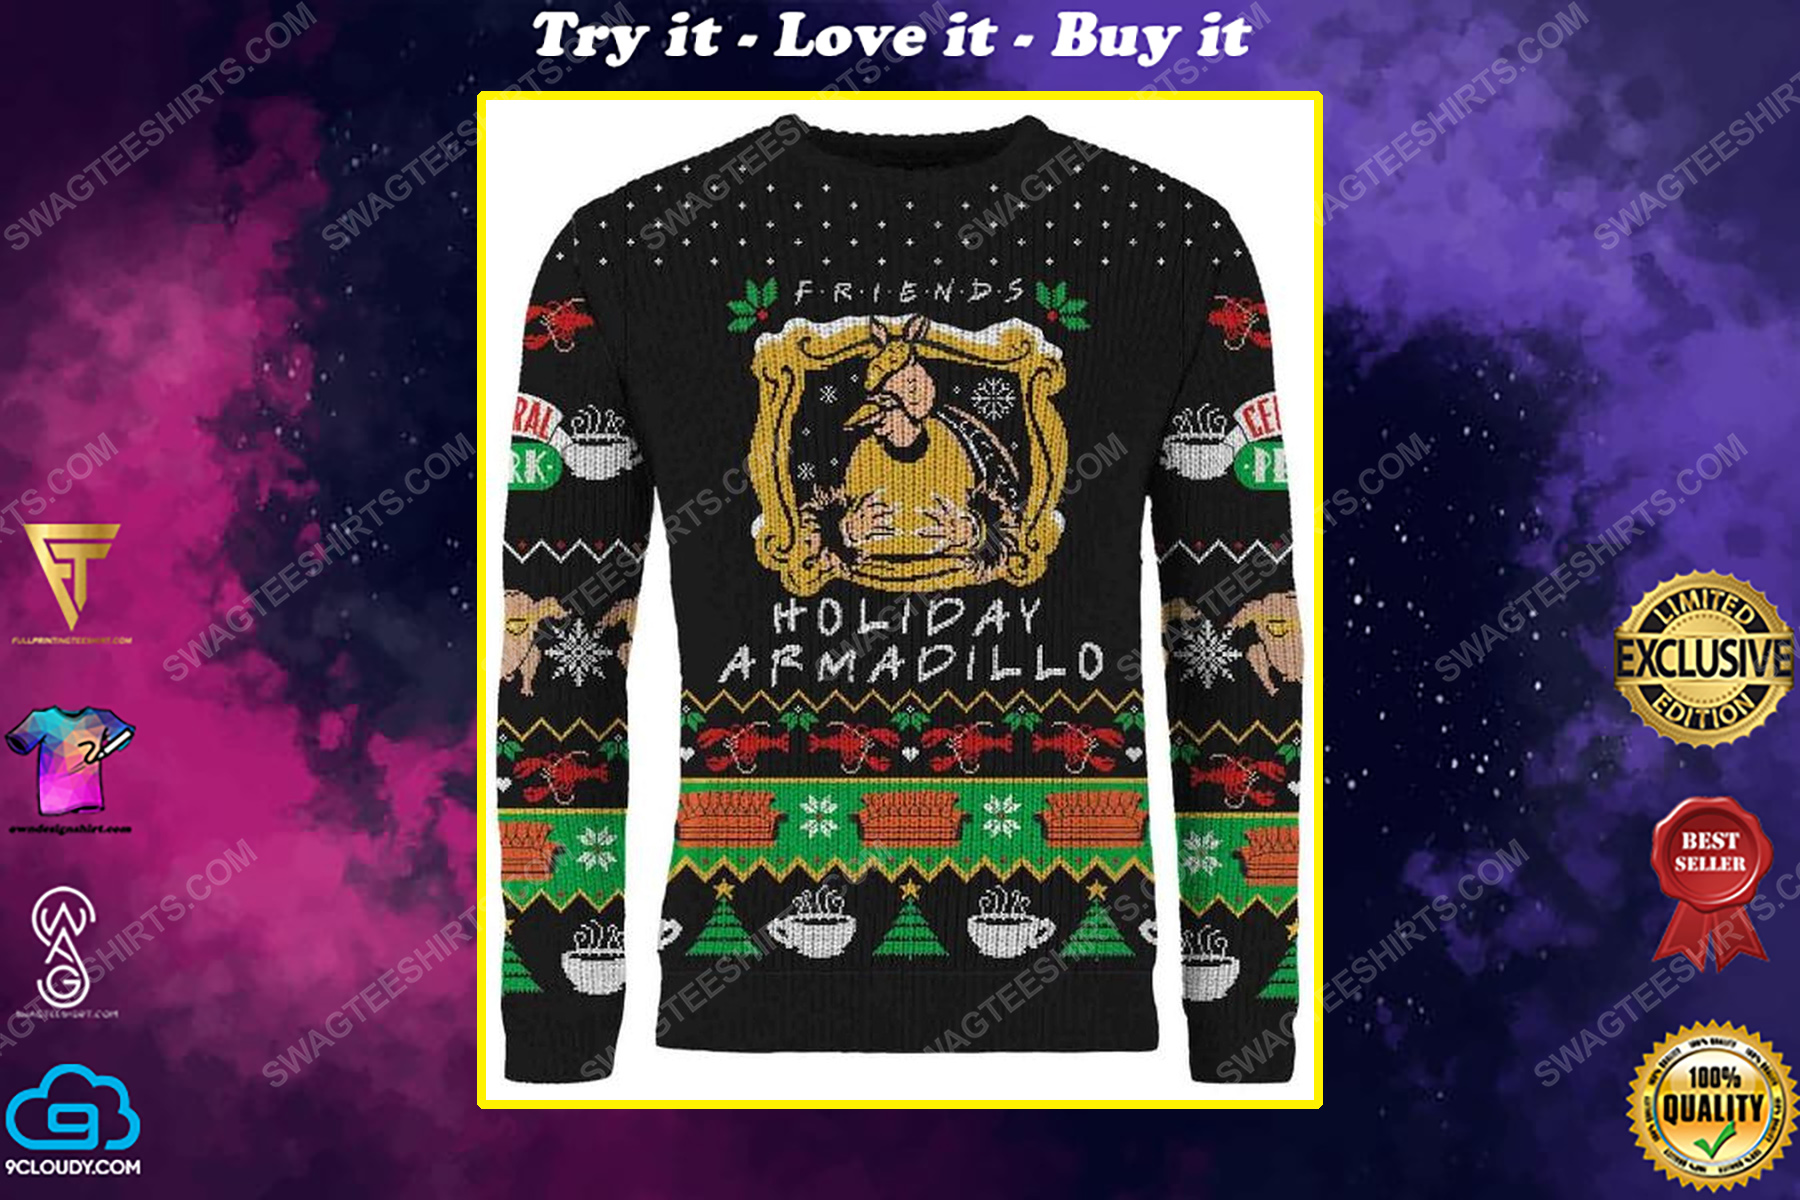 TV show friends holiday armadillo full print ugly christmas sweater